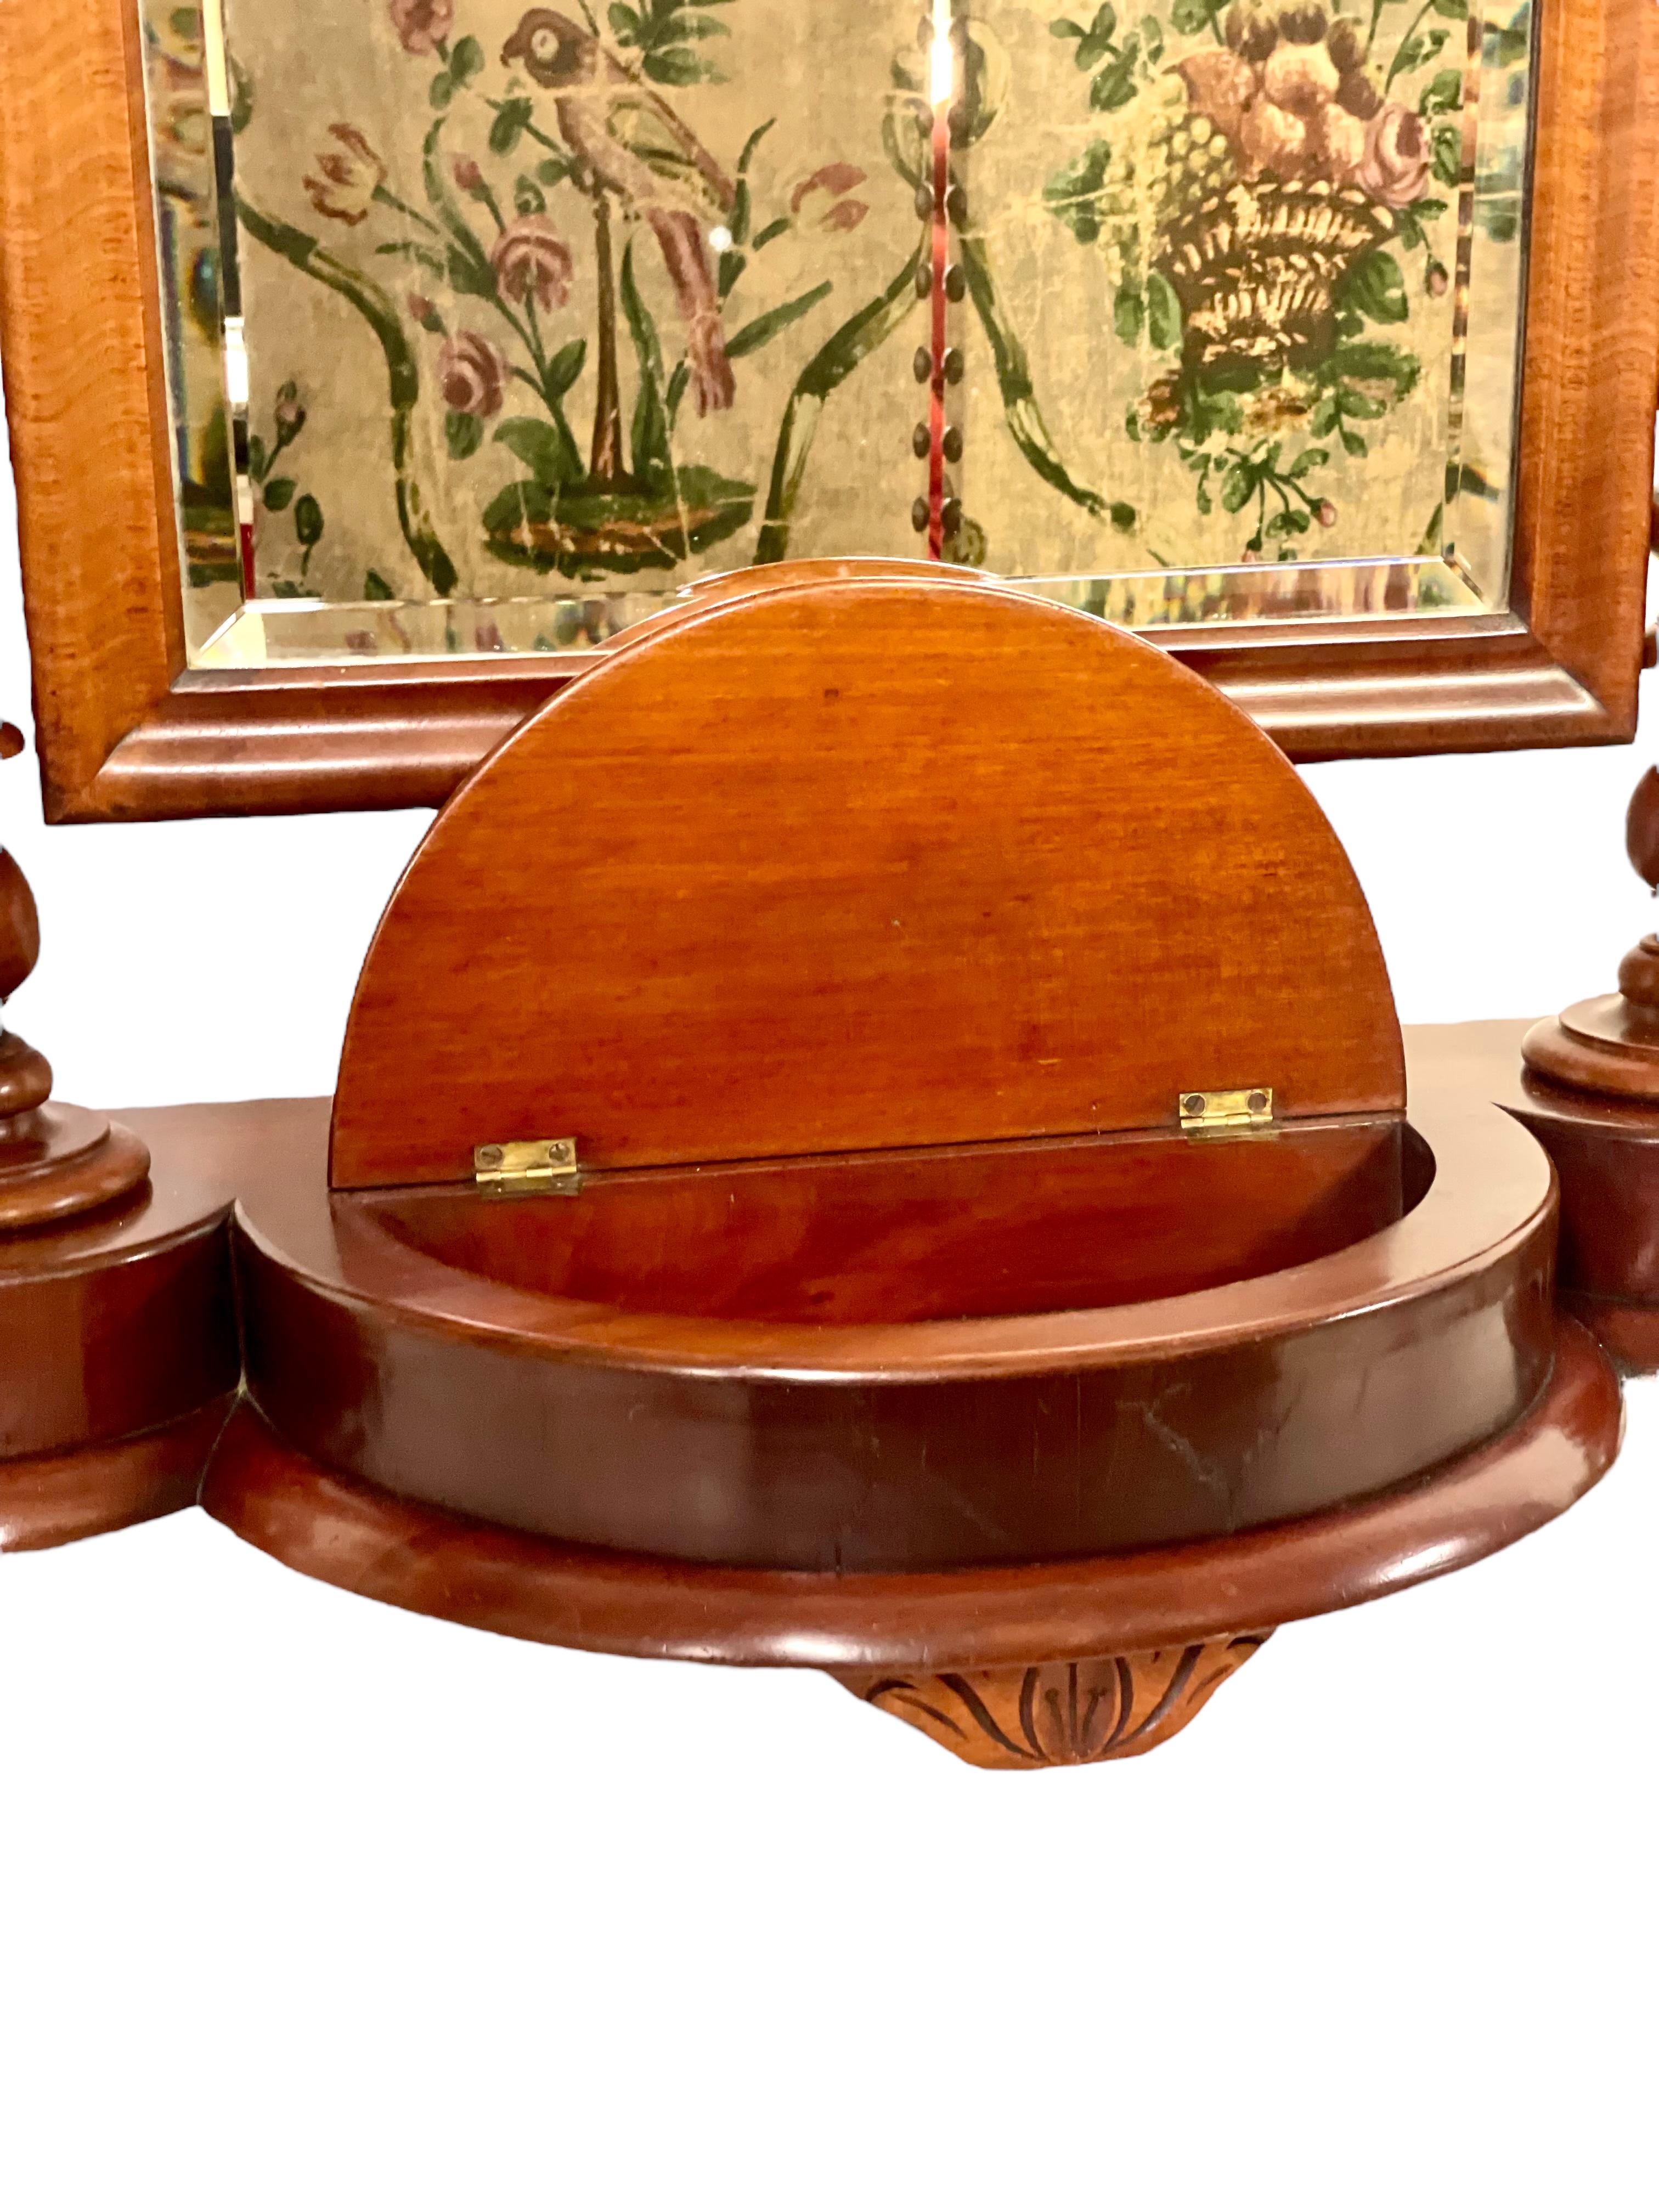 An antique gentleman's vanity toilet mirror, or 'Psyche', dating from the 19th century and beautifully crafted from gleaming mahogany. This tilting table-top mirror is full of character, with wonderful barley-twist uprights on either side of its